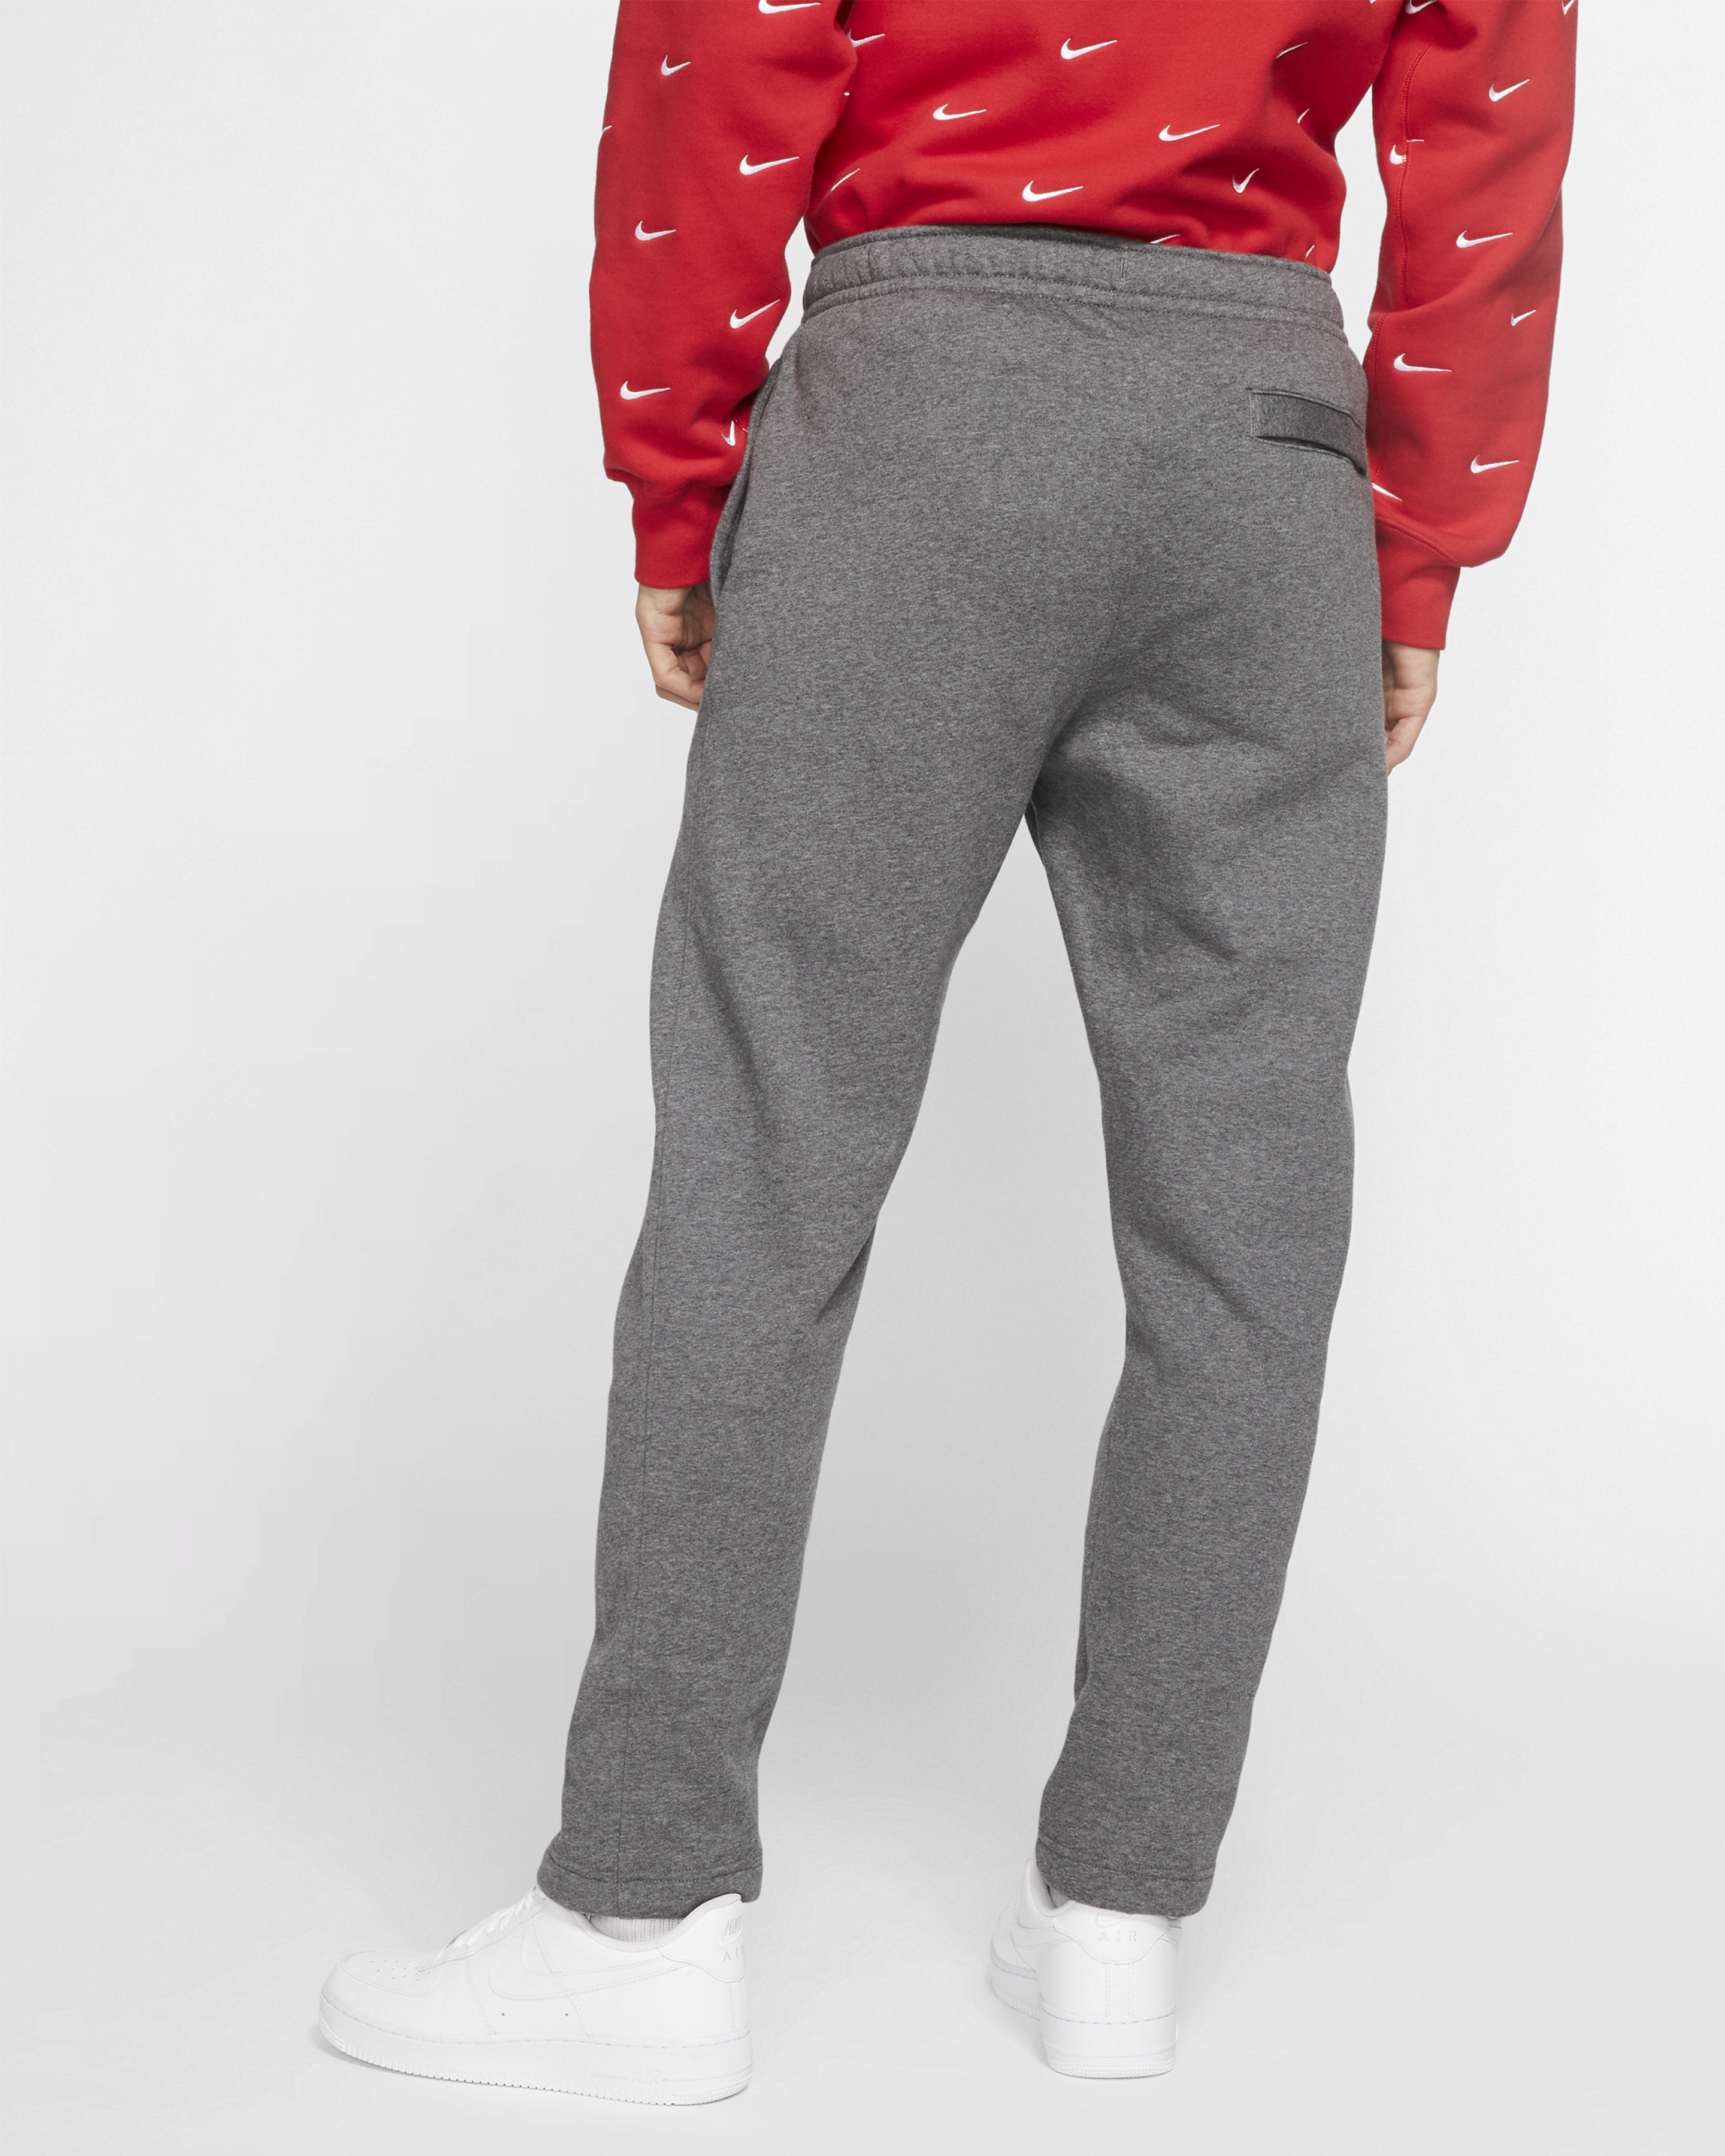 Hanes Sweatpants Are on Sale for as Little as $10 at